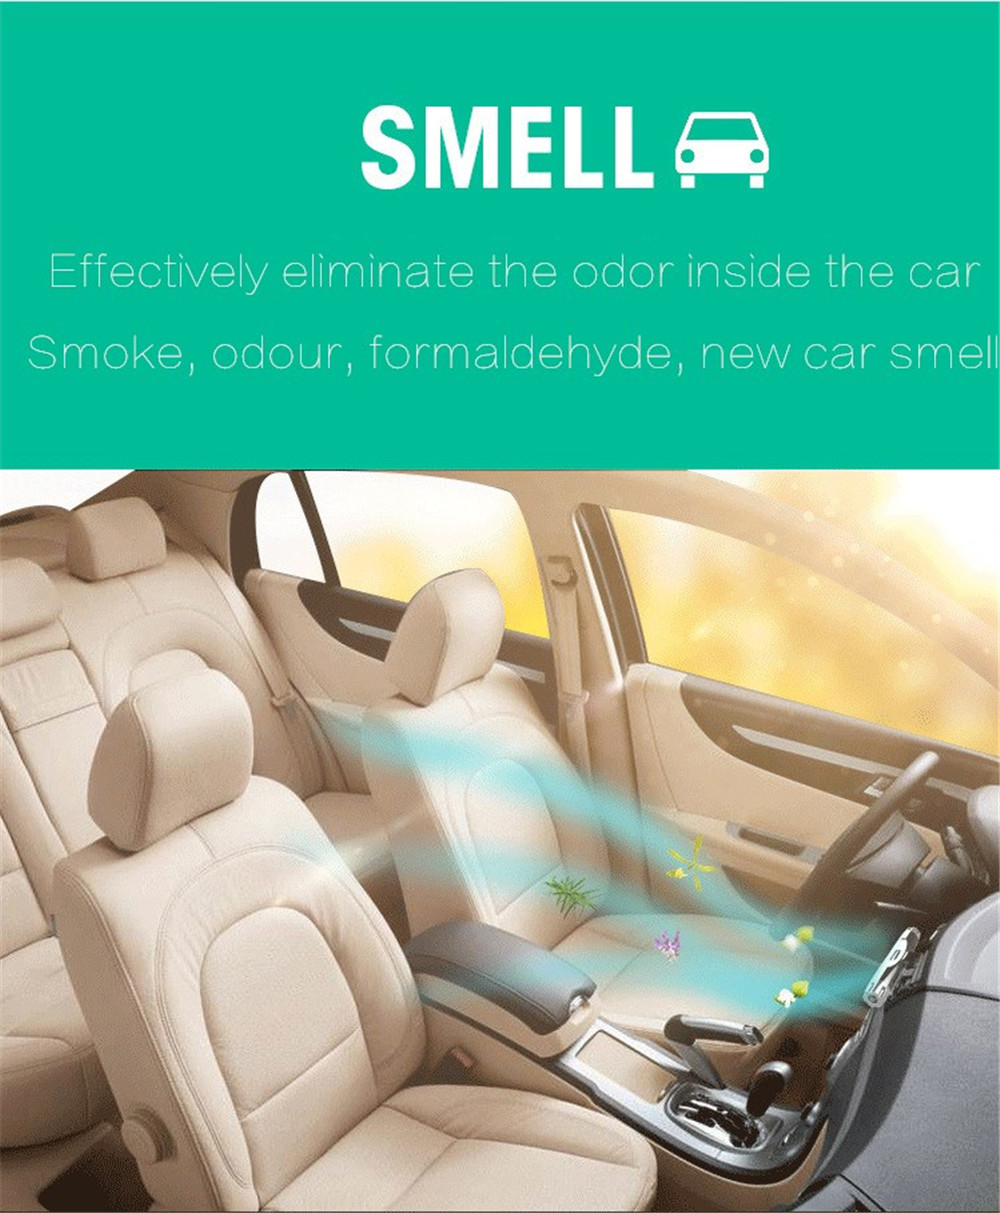 SpedCrd Car Freshener Auto Outlet Perfume Vent Air Diffuser